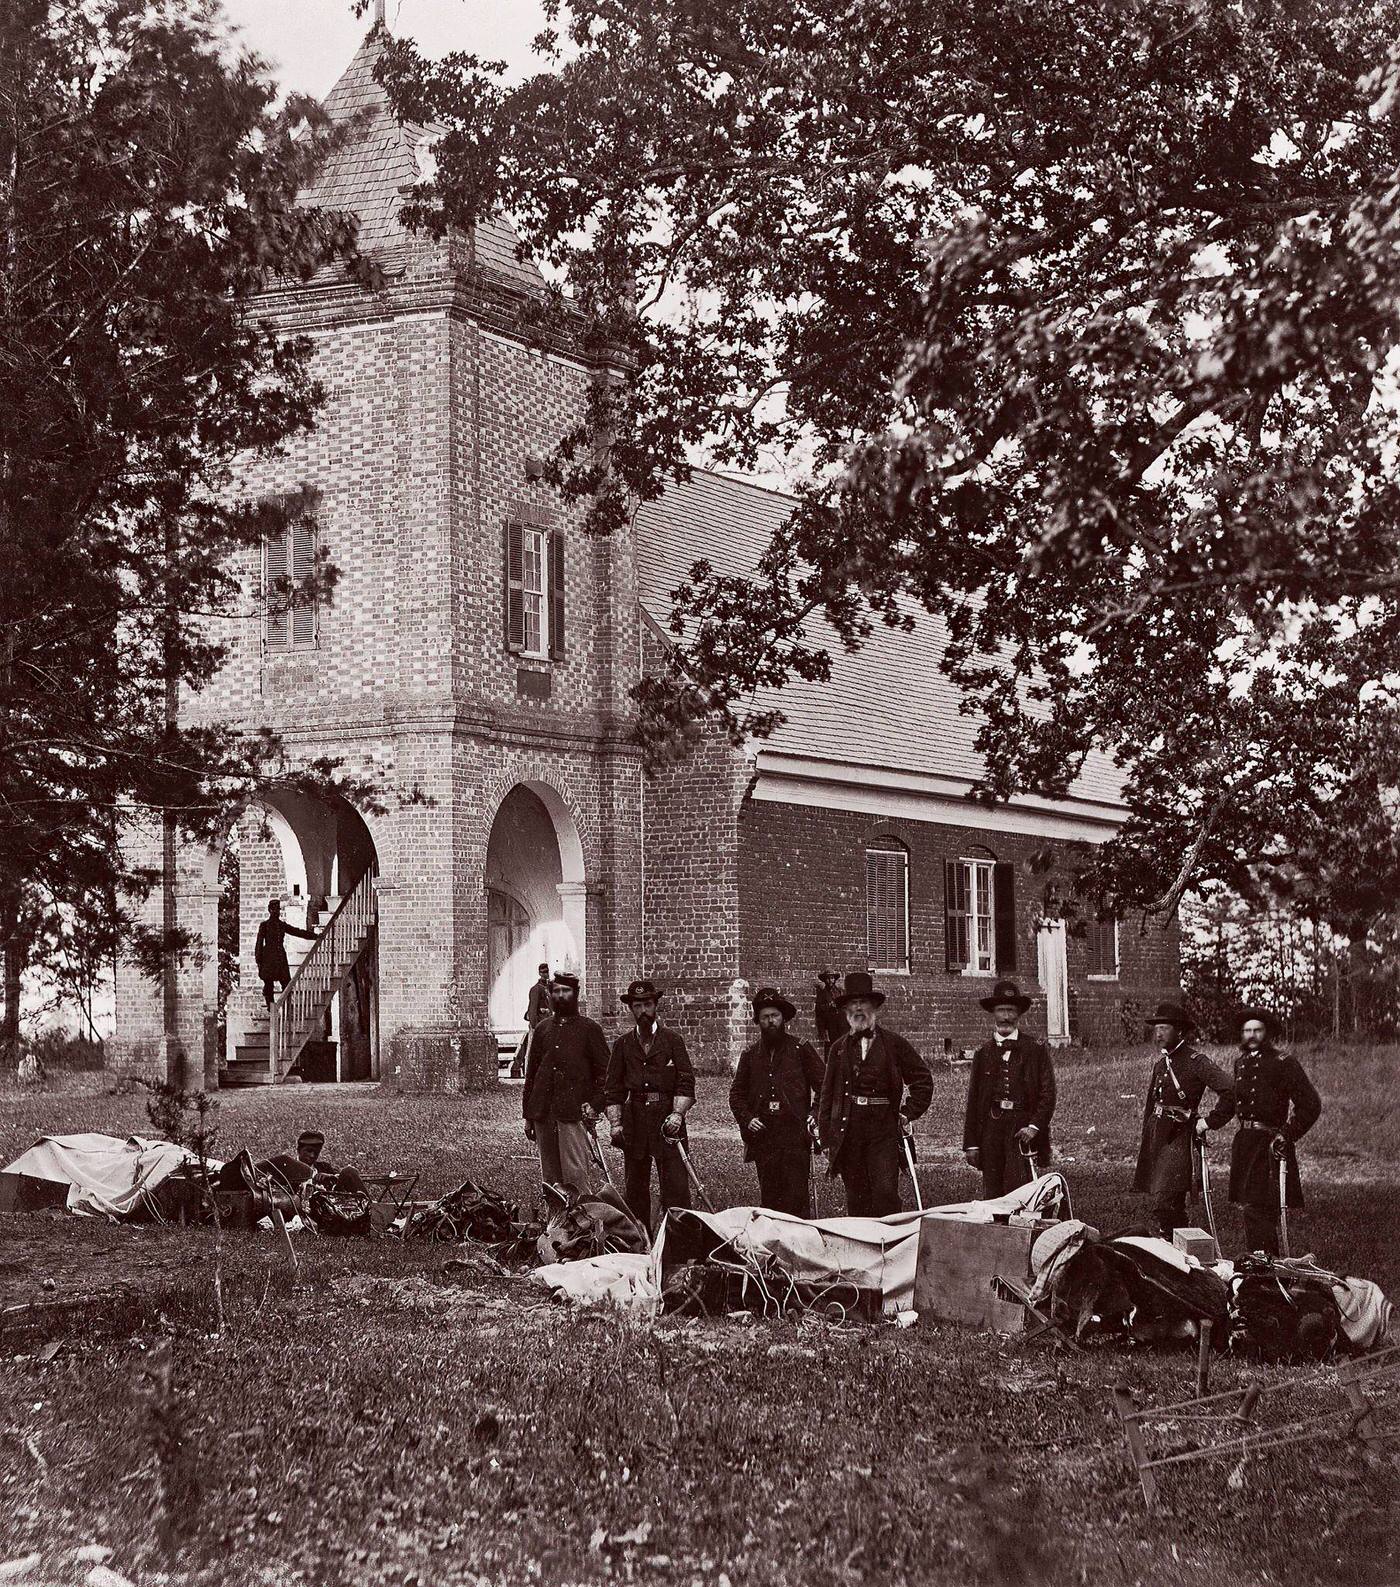 St. Peter's Church near White House, Where Washington was Married. General E. V. Sumner and Staff, 1861-65